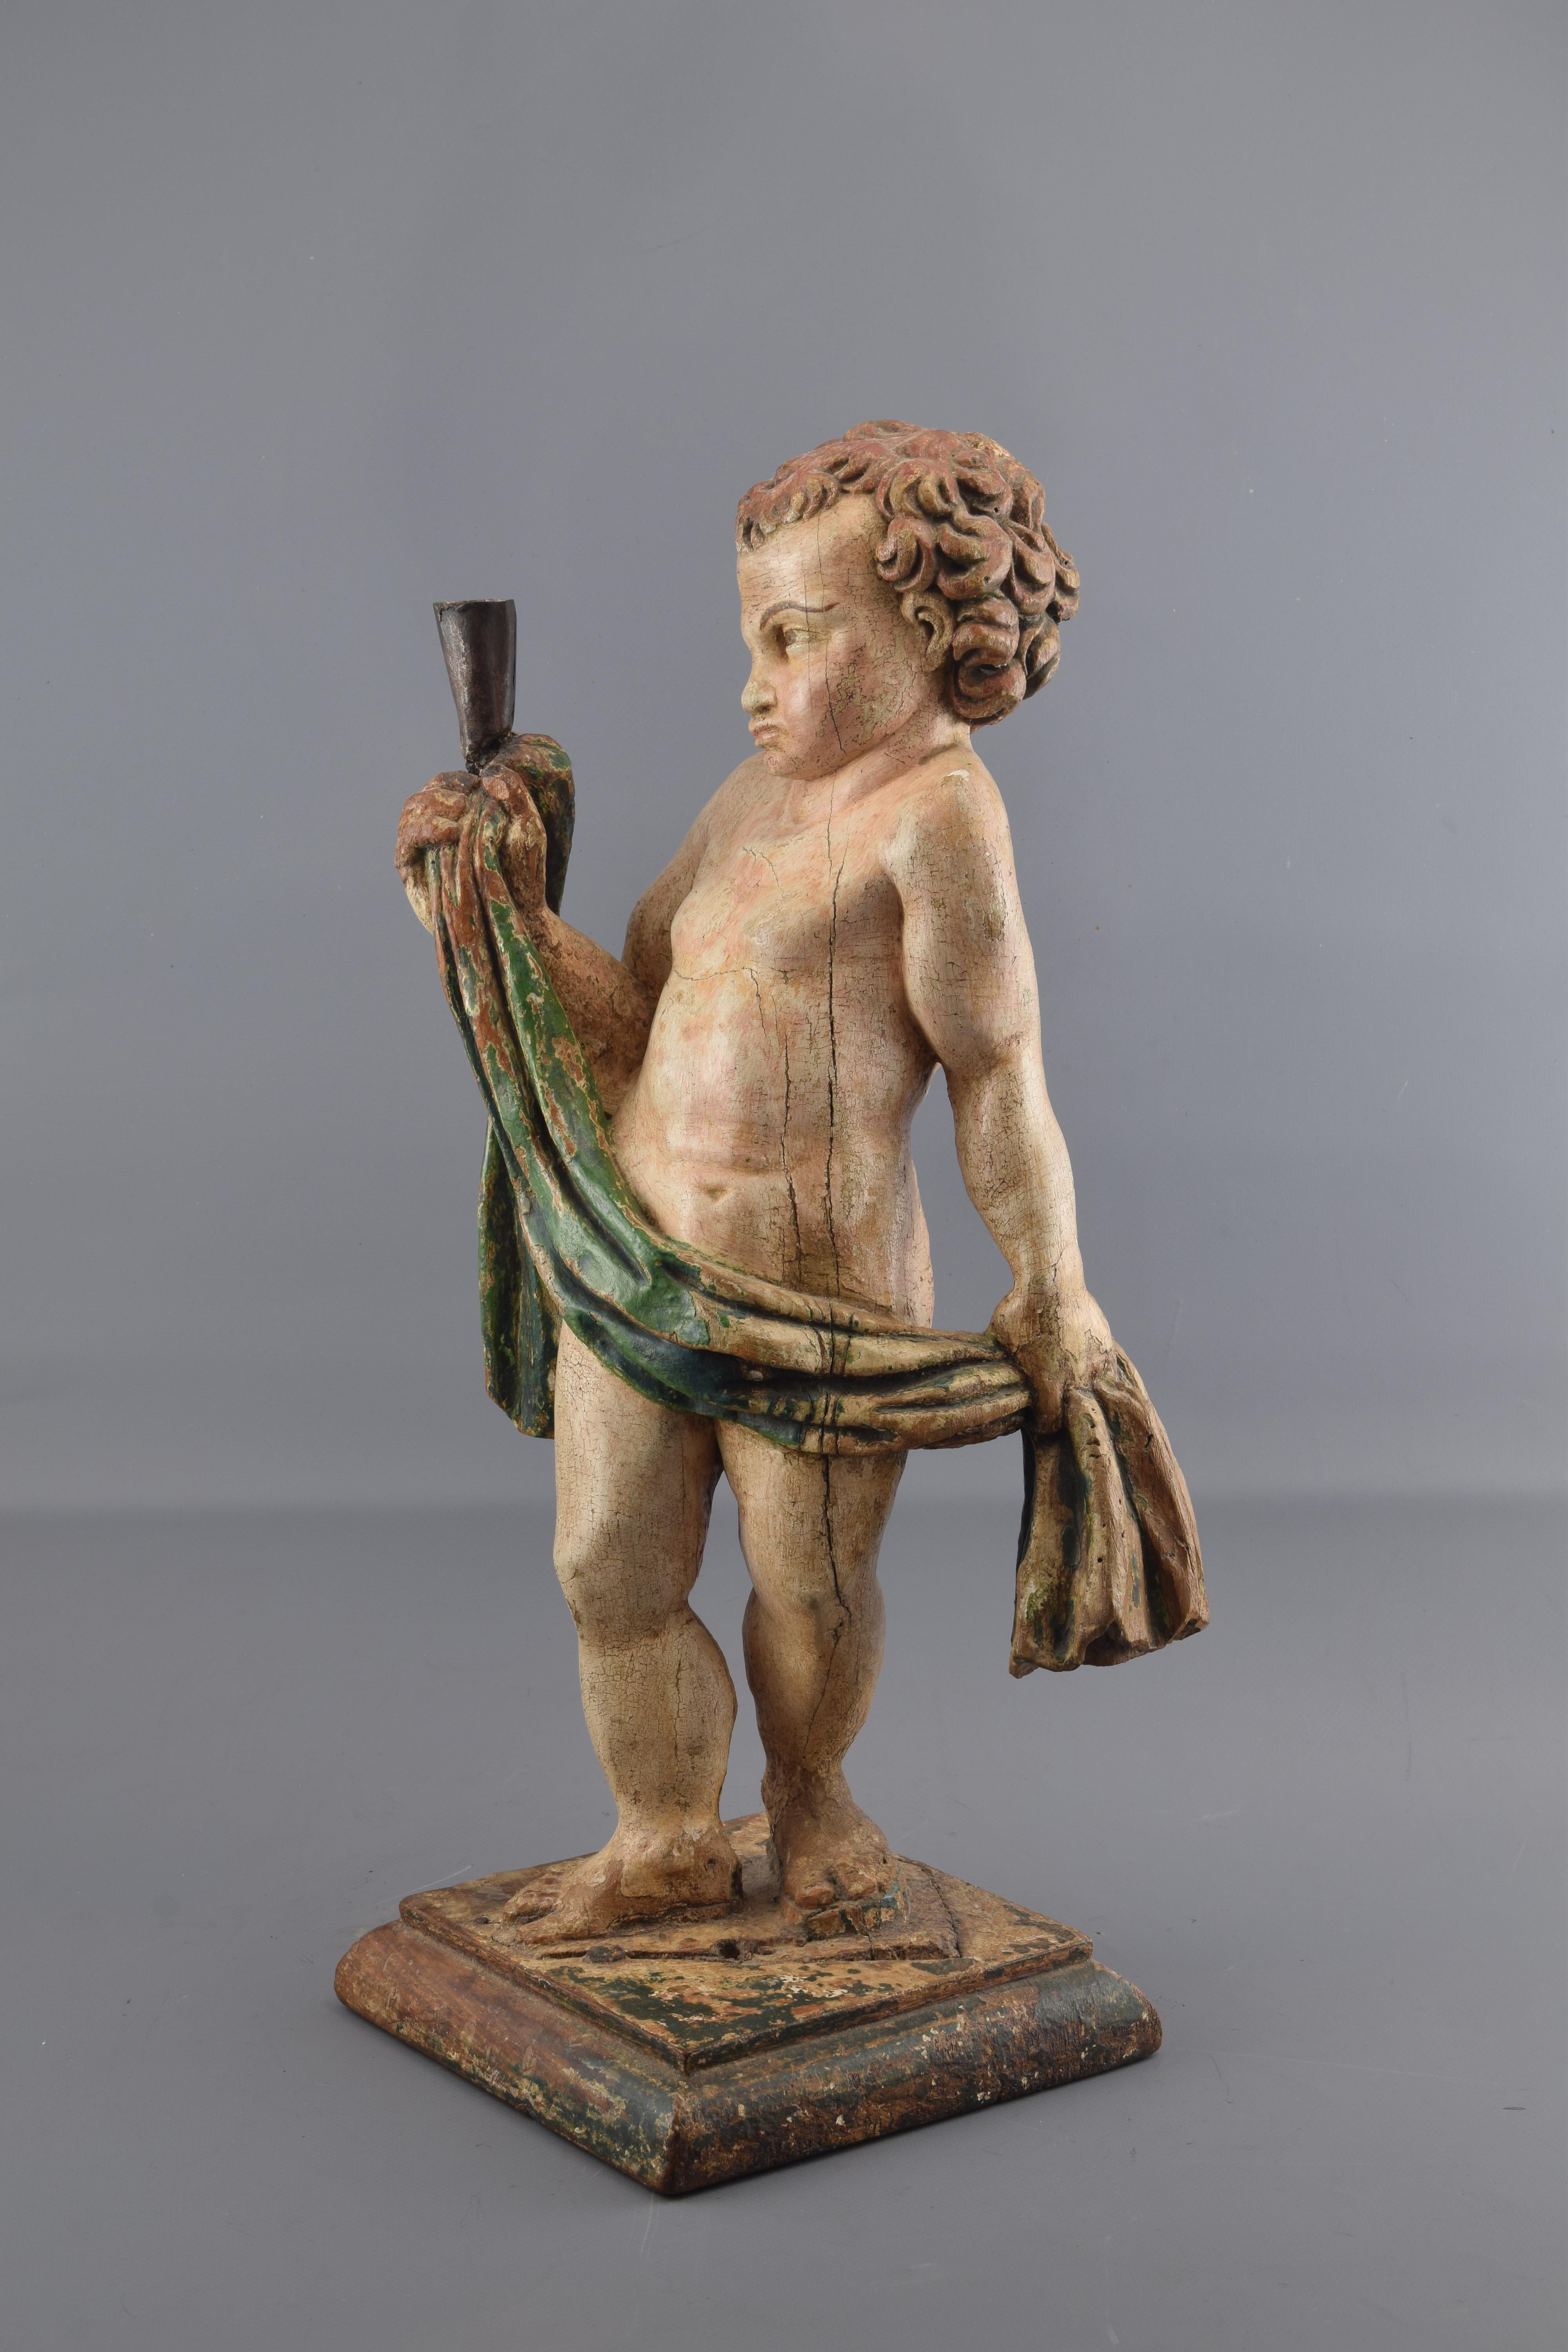 Sculpture (figural candlestick). Carved and polychrome wood, wrought iron. Castilian school, 16tyh-17th centuries.
Carved and polychrome wooden sculpture placed on a simple base showing a half-naked male figure, holding with his hands a cloth that